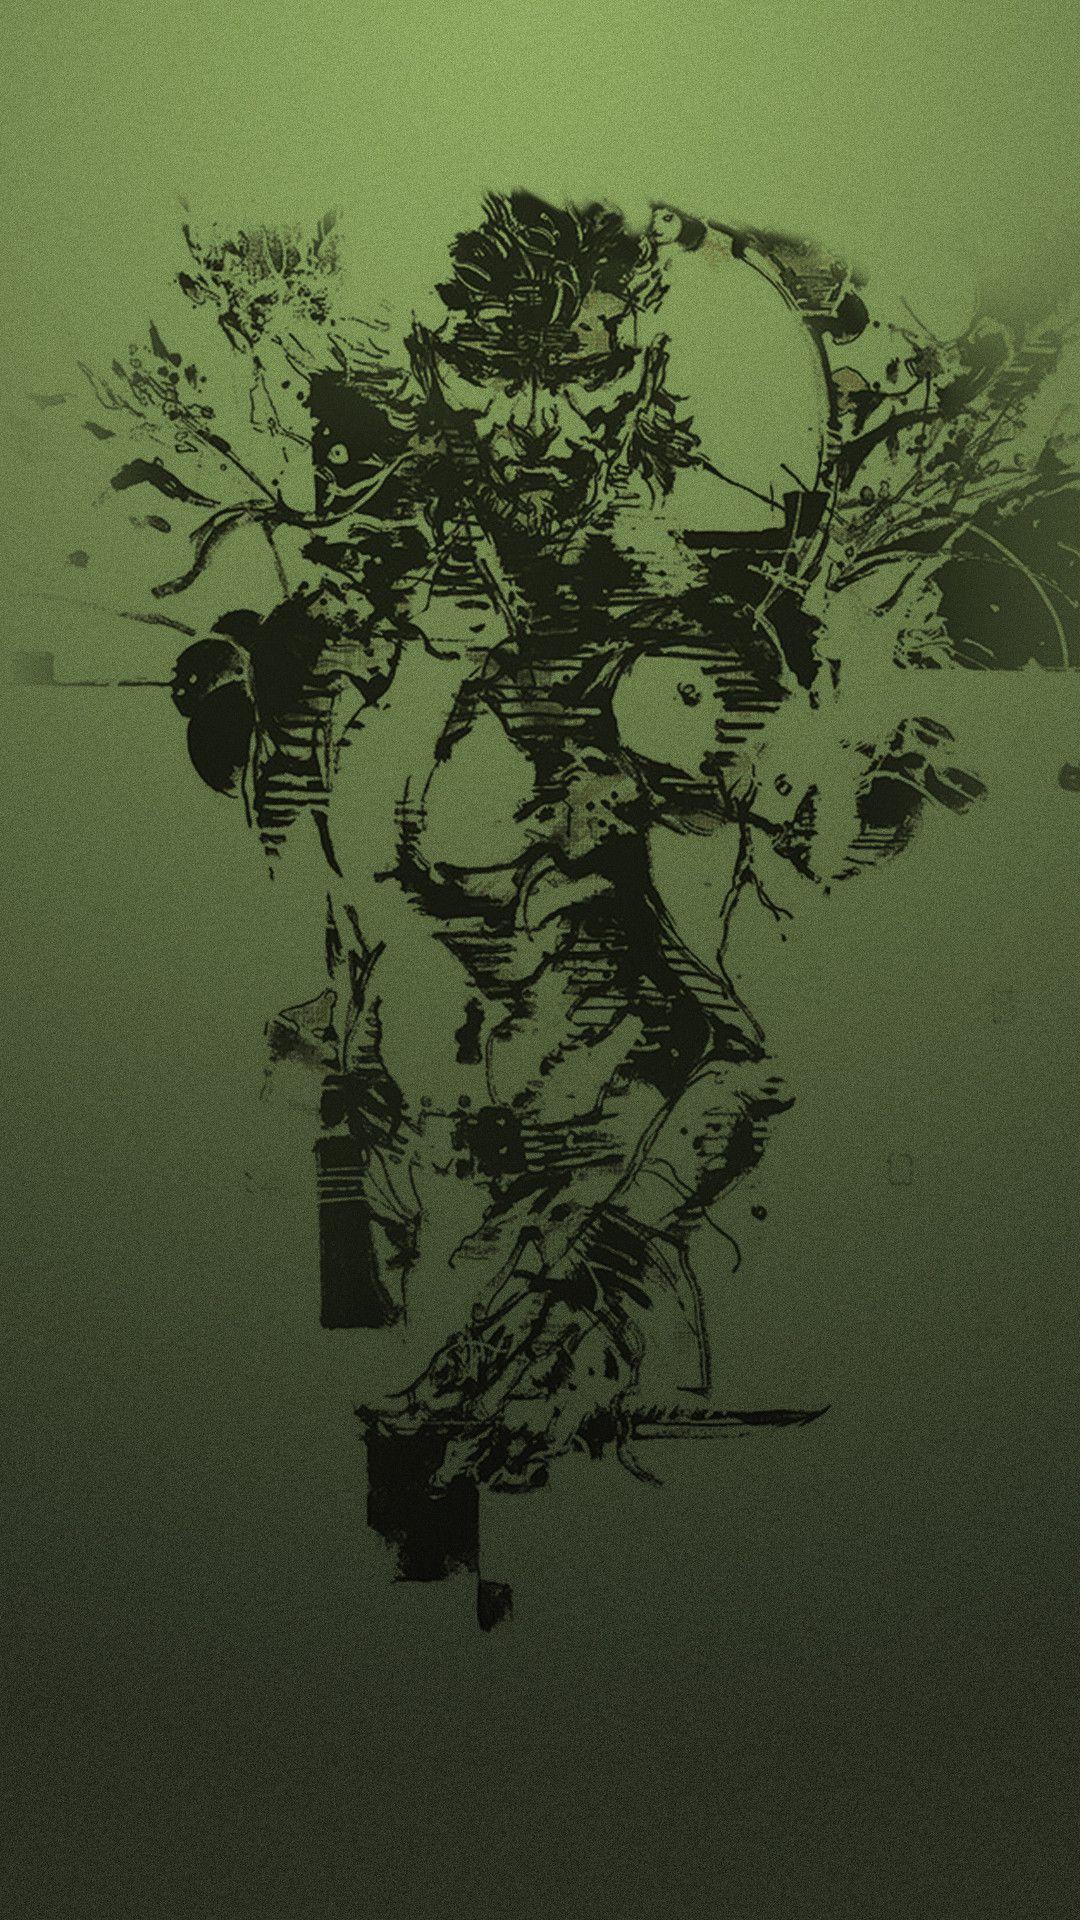 MGS3 and GZ Wallpaper